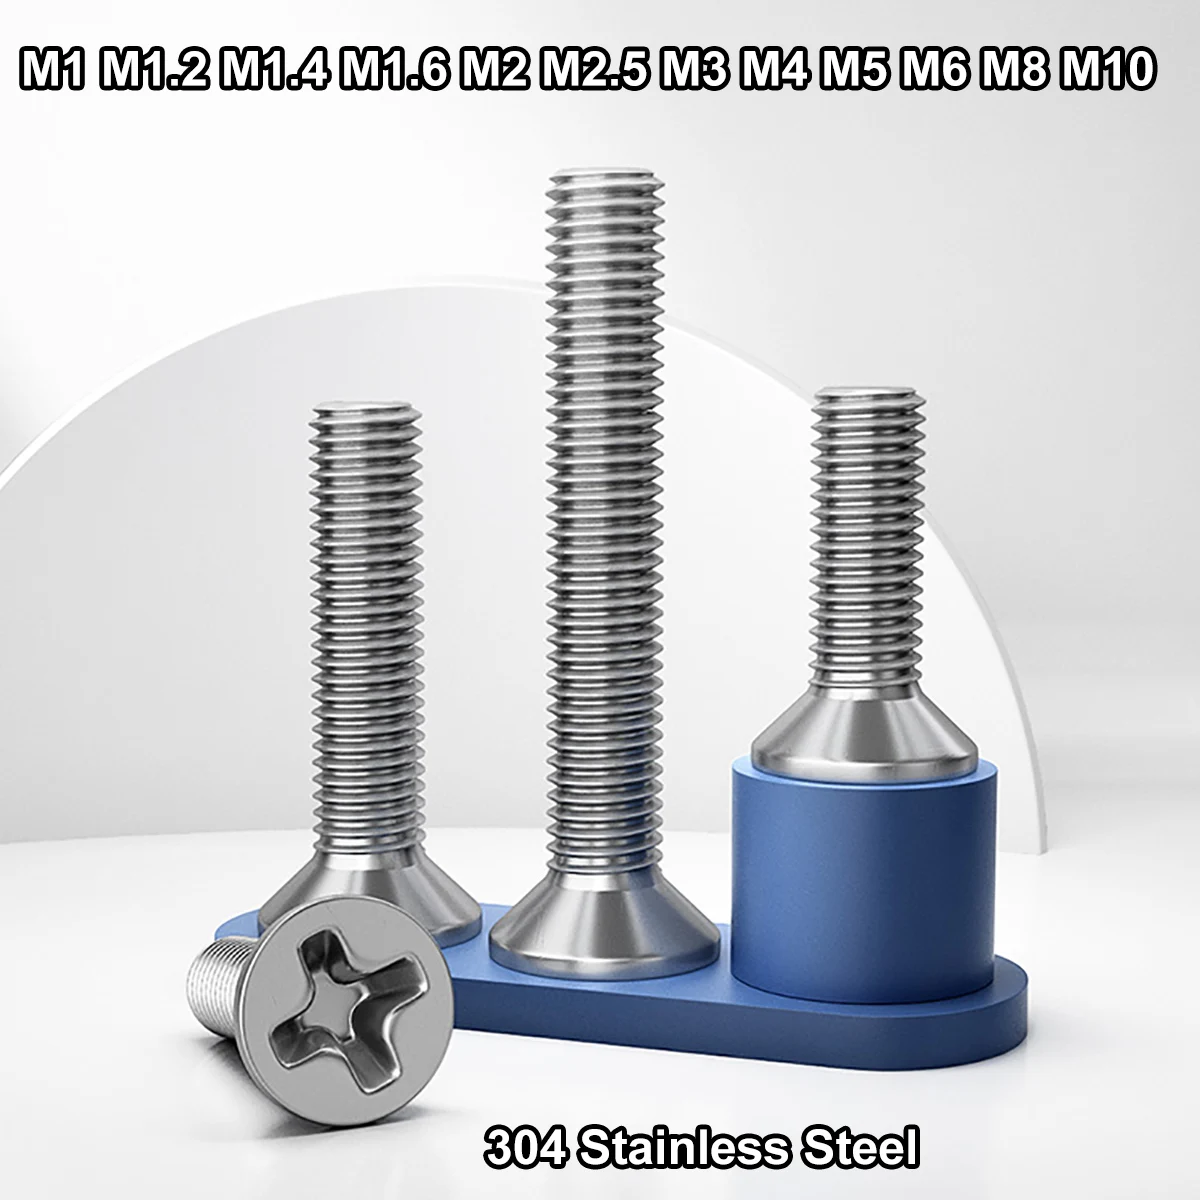 

2-50Pcs A2-70 304 Stainless Steel Cross Phillips Flat Countersunk Head Screw Bolt M1 M1.2 M1.4 M1.6 M2 M2.5 M3 M4 M5 M6 M8 M10